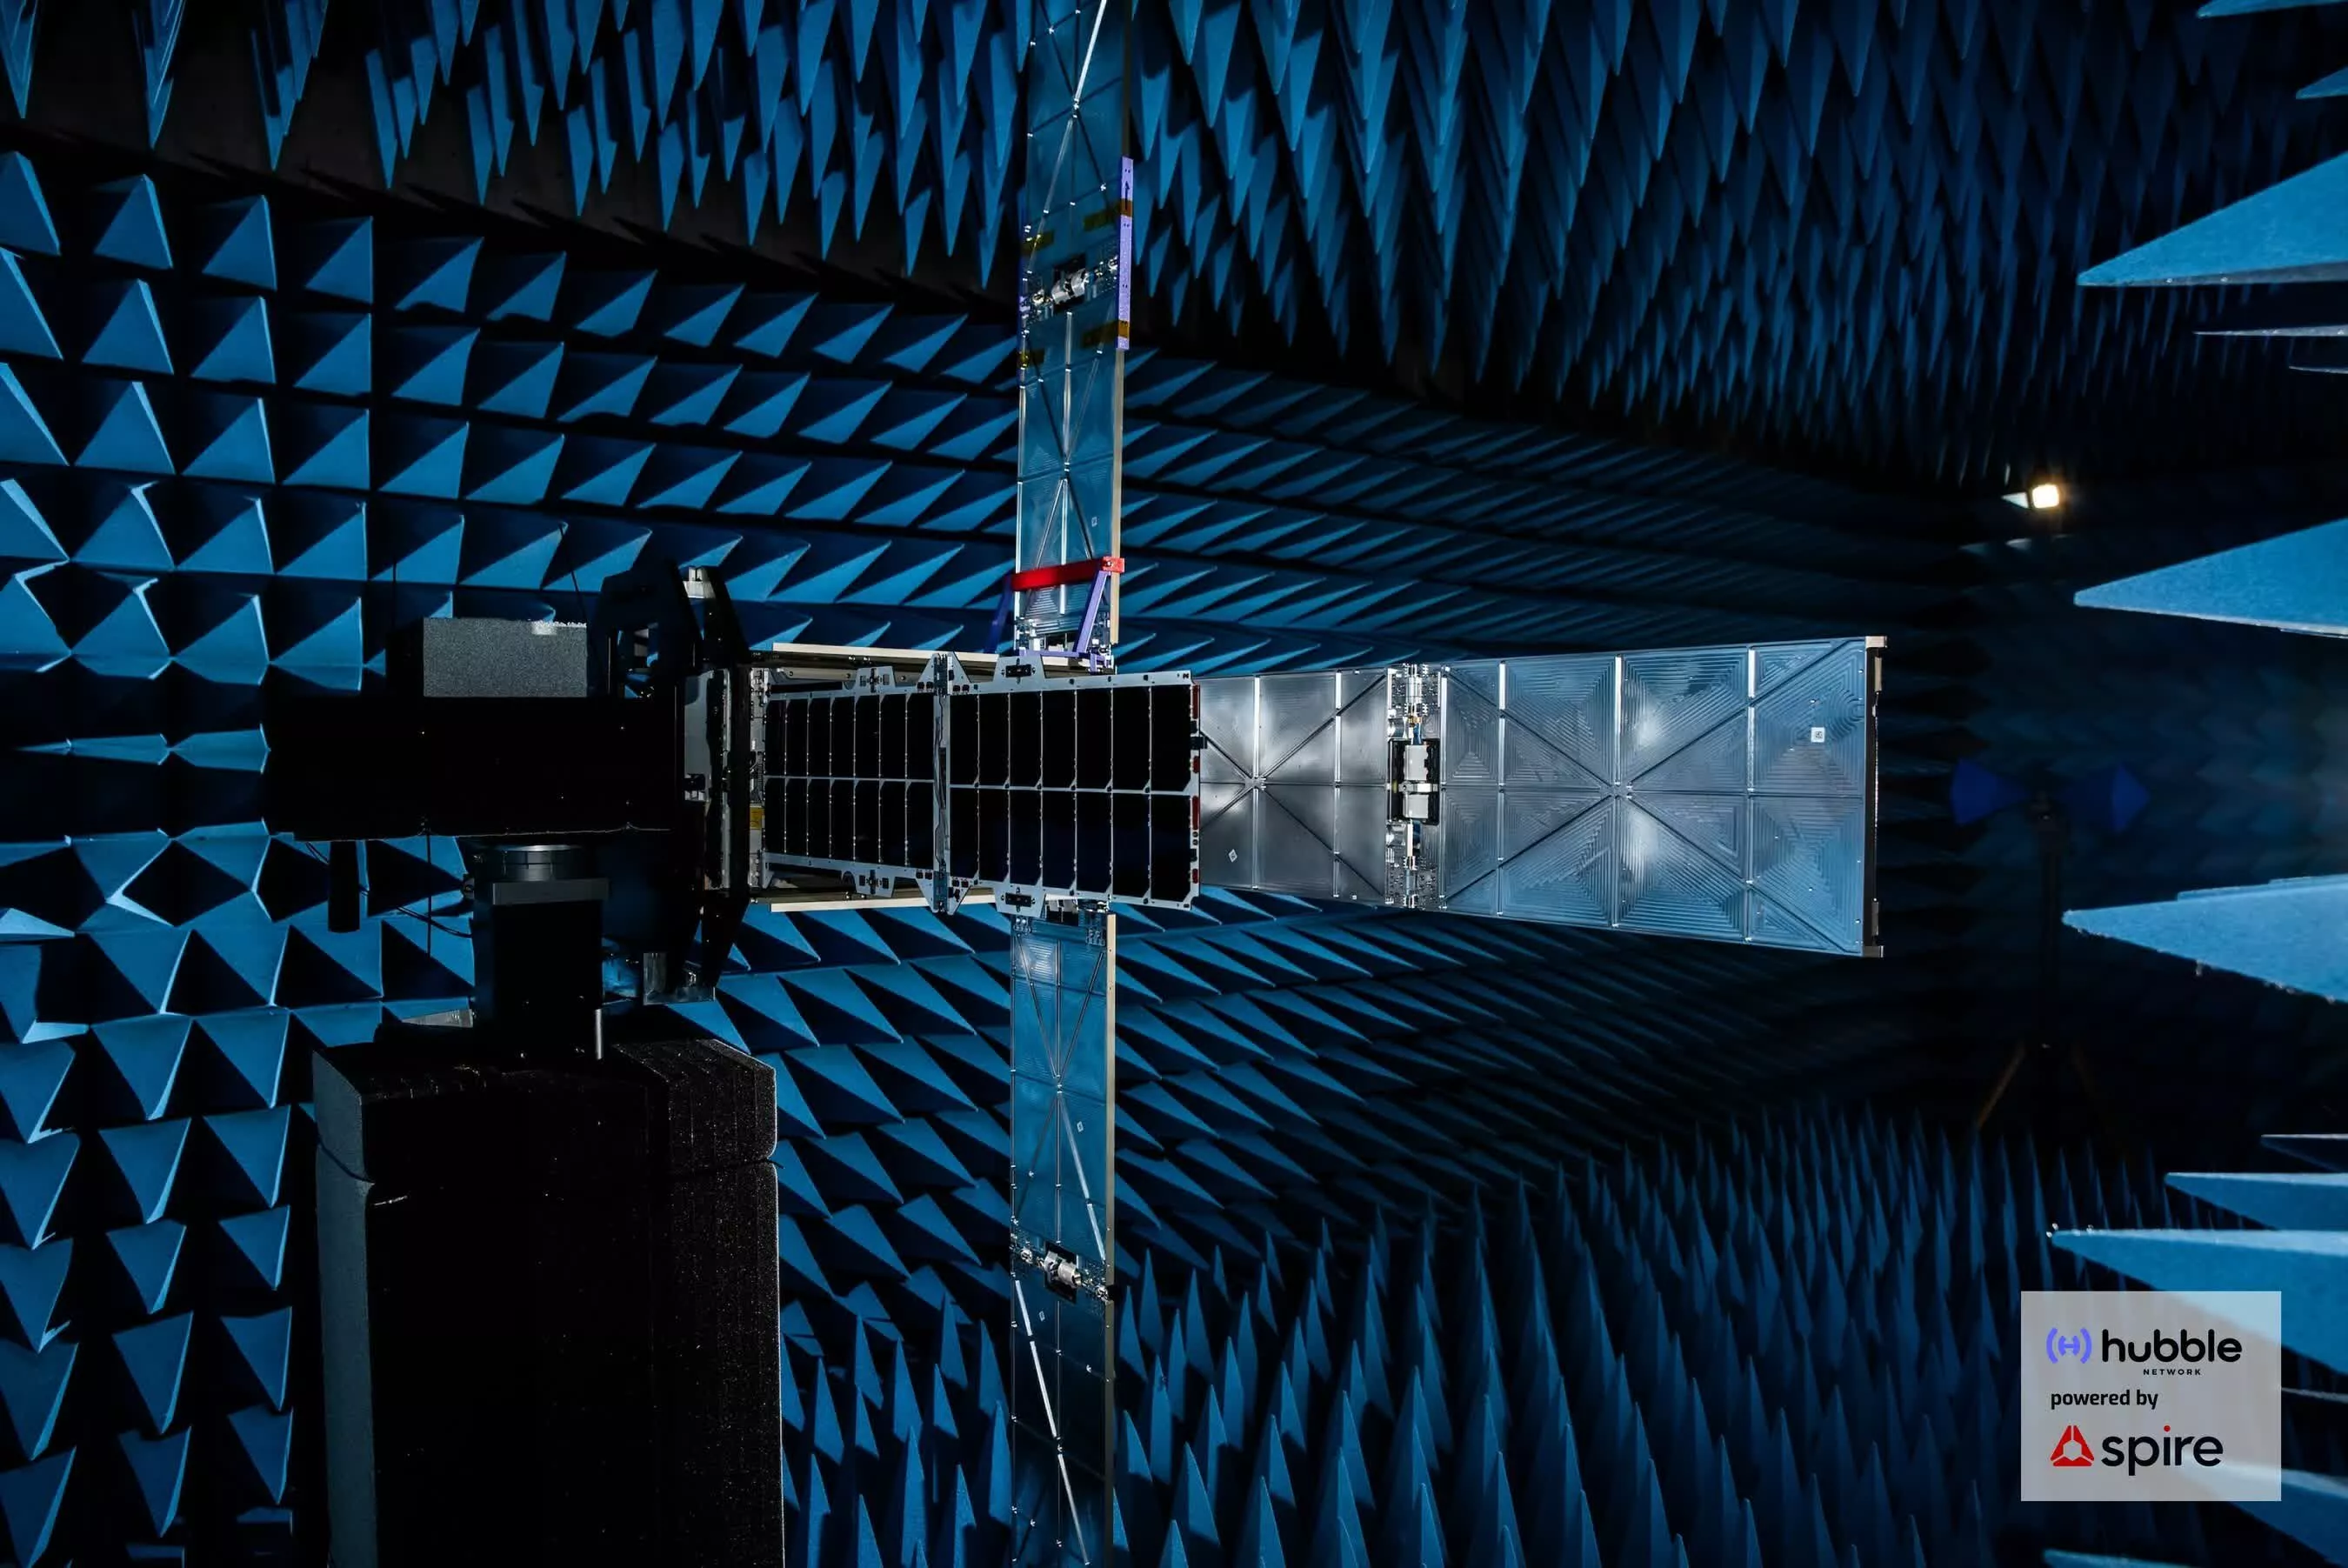 One of Hubble's satellites undergoing testing within a terrestrial test chamber.